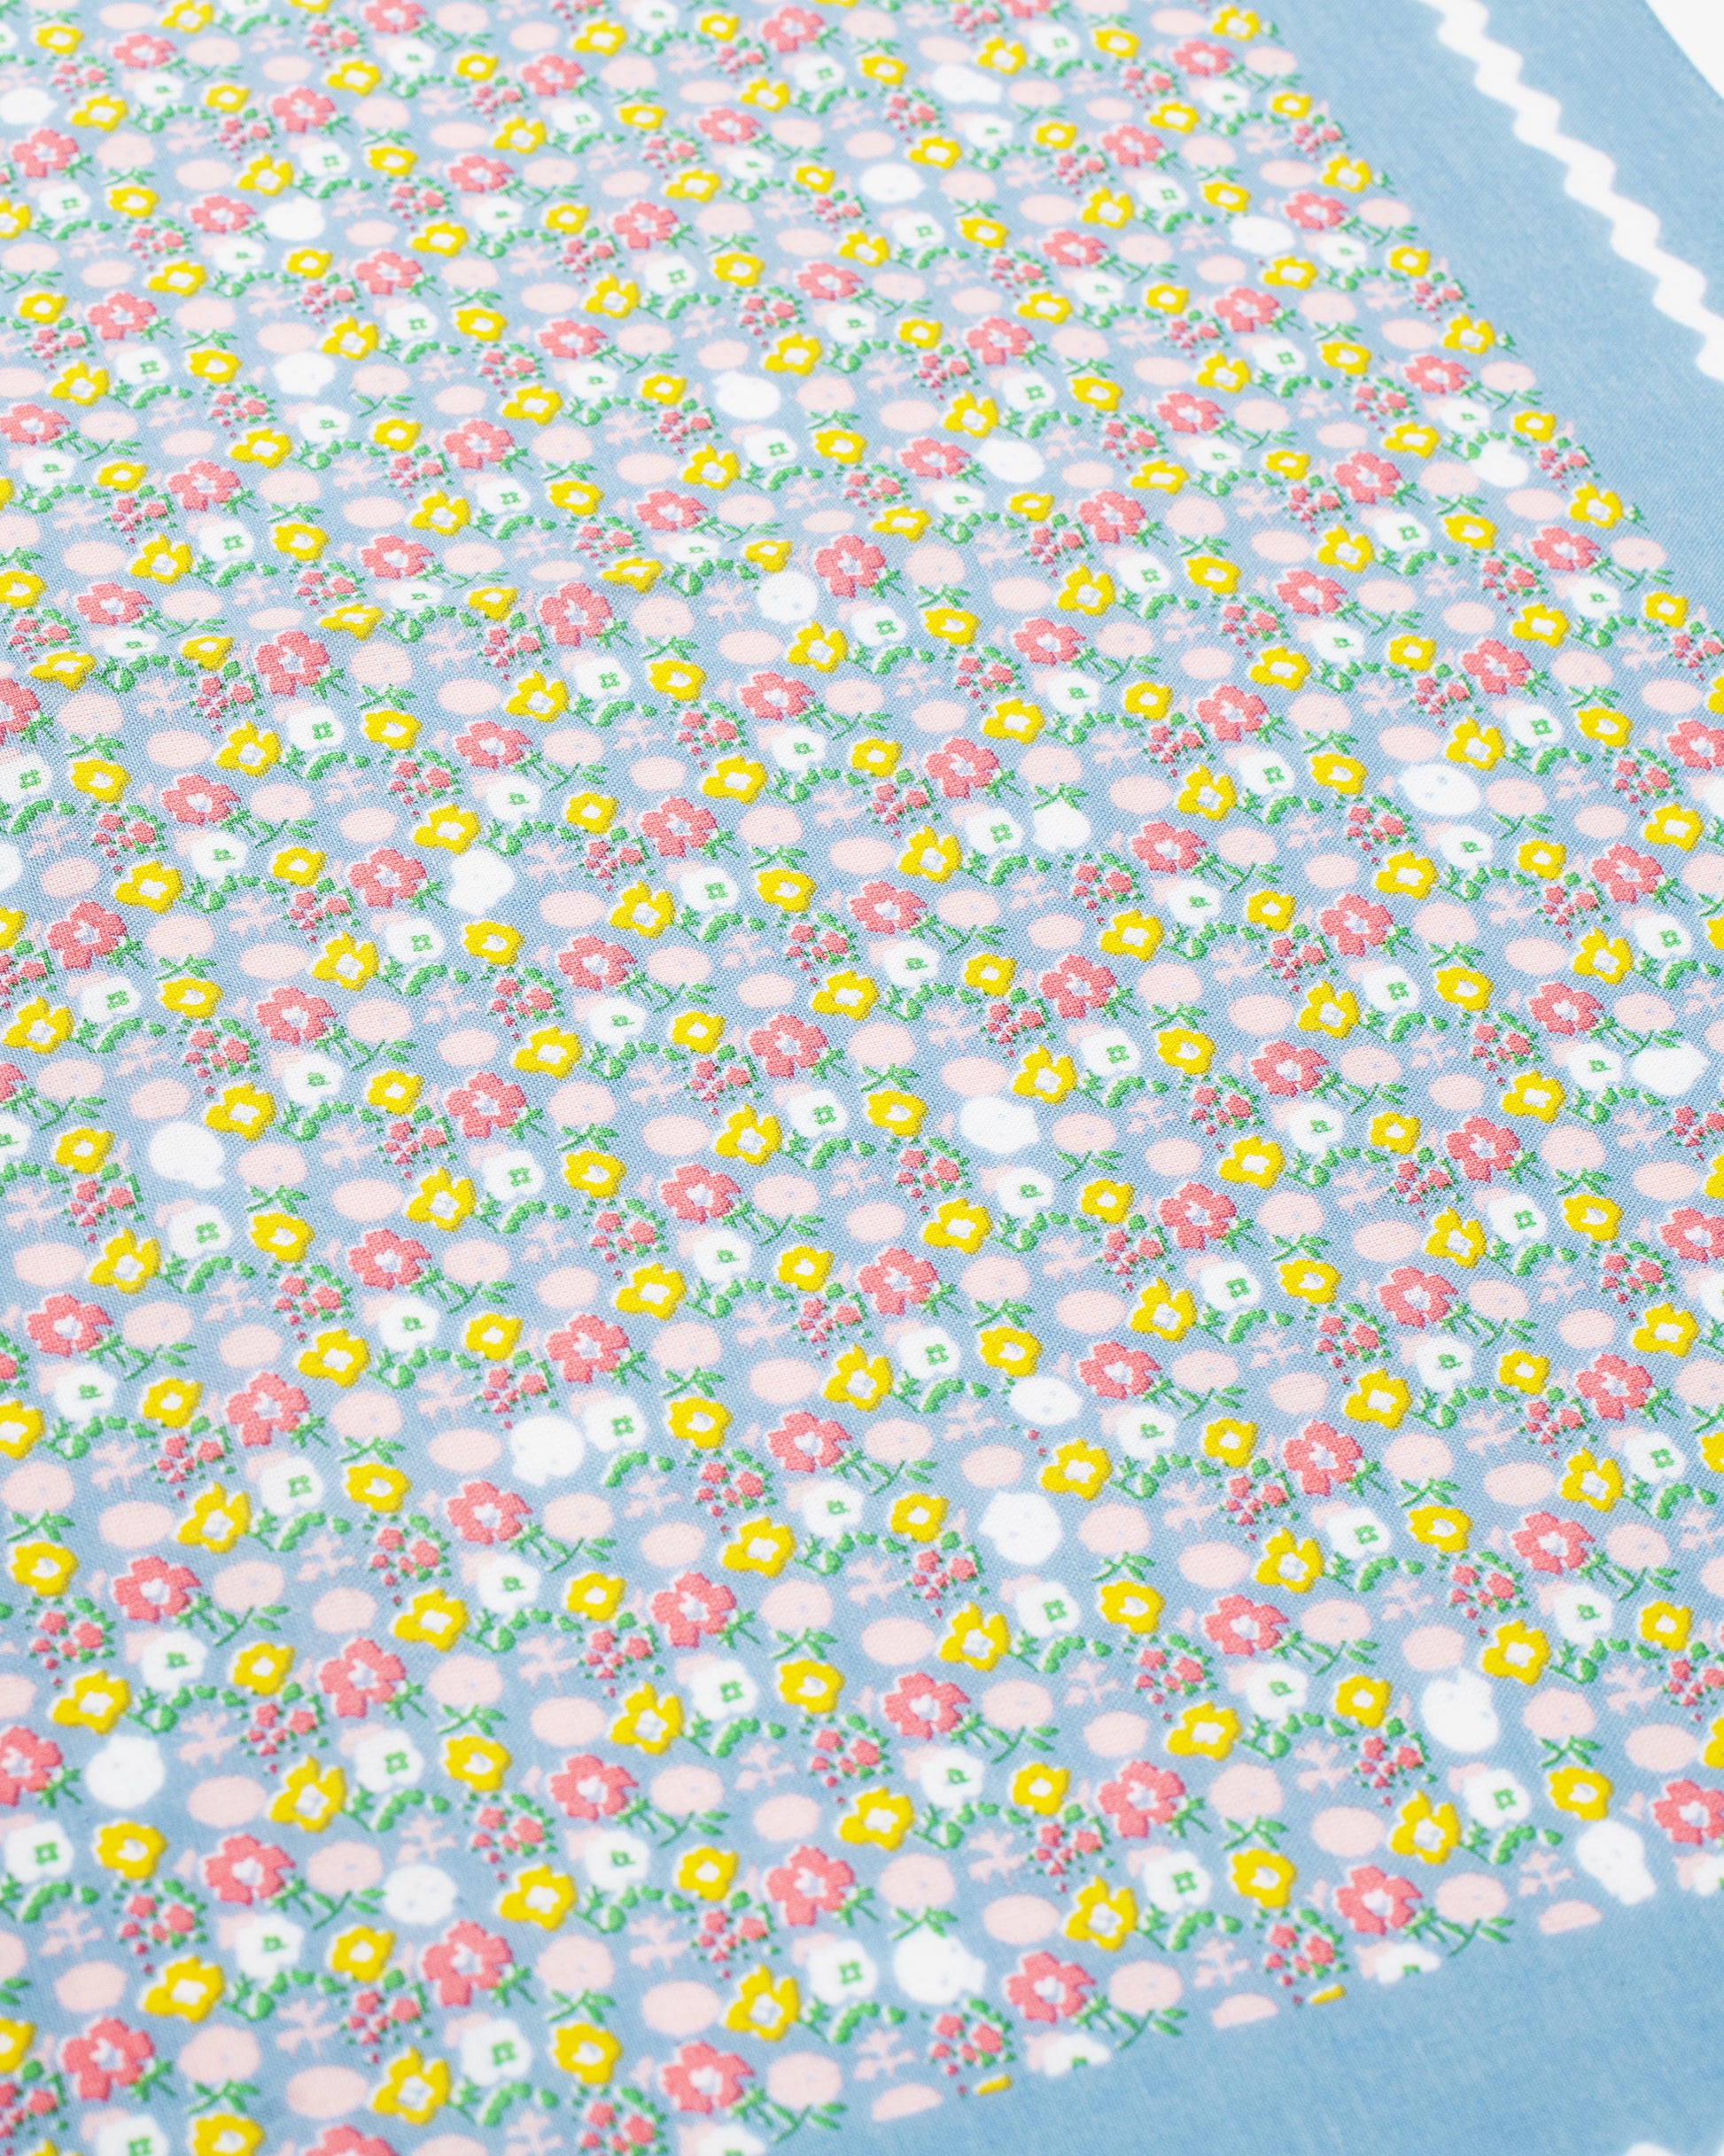 Don't let this pastel bandana fool you - there are tiny skulls hidden amongst the flowers.